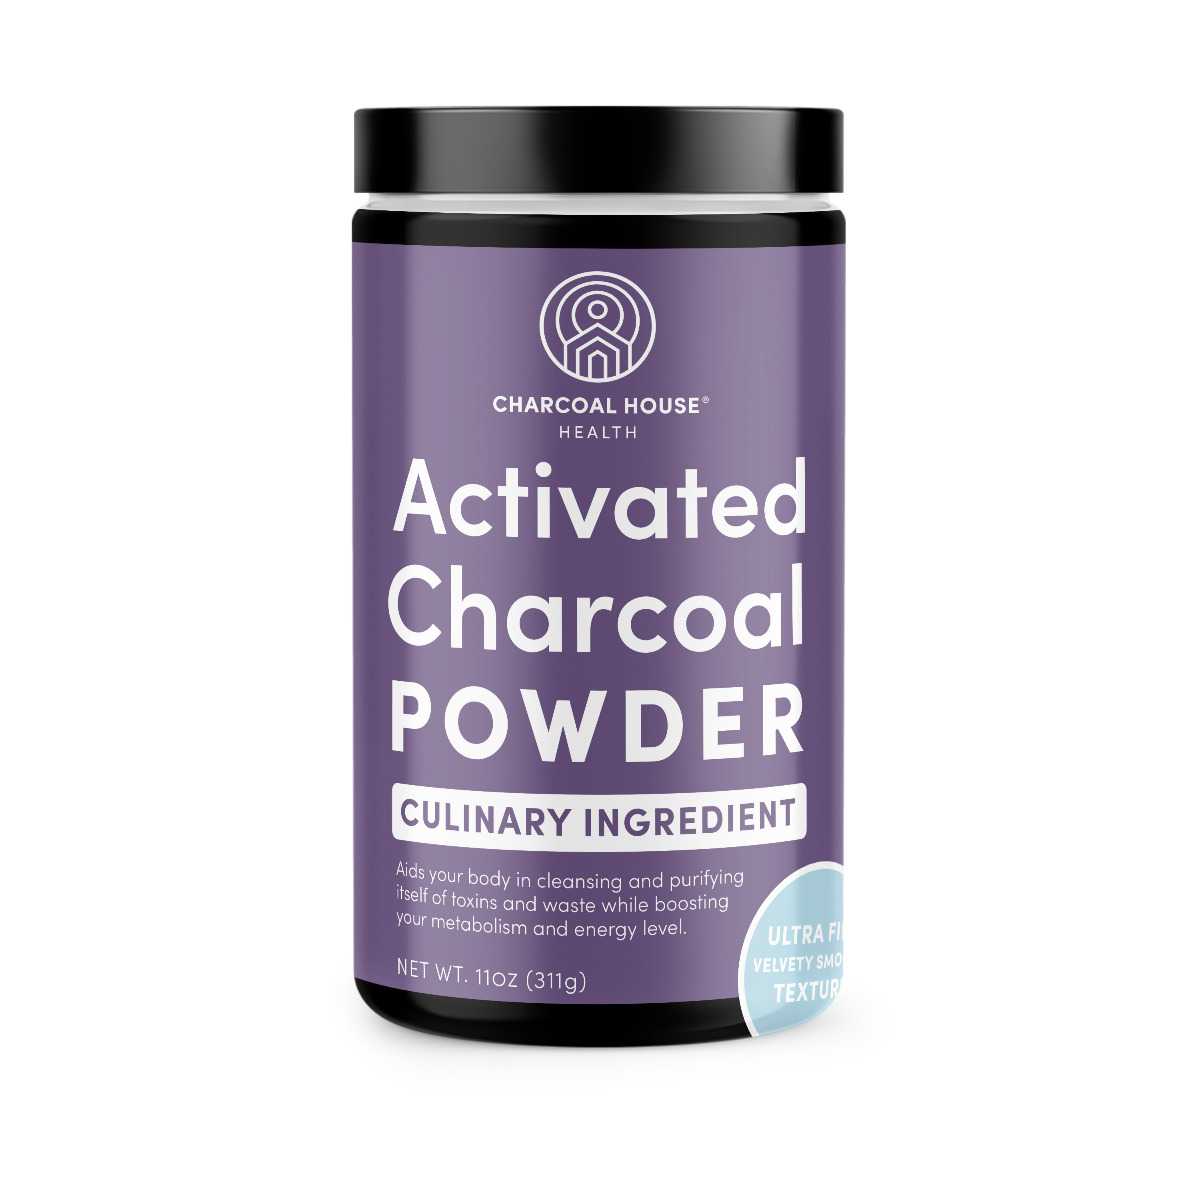 Coconut Activated Charcoal Powder - ULTRA FINE (BULK)